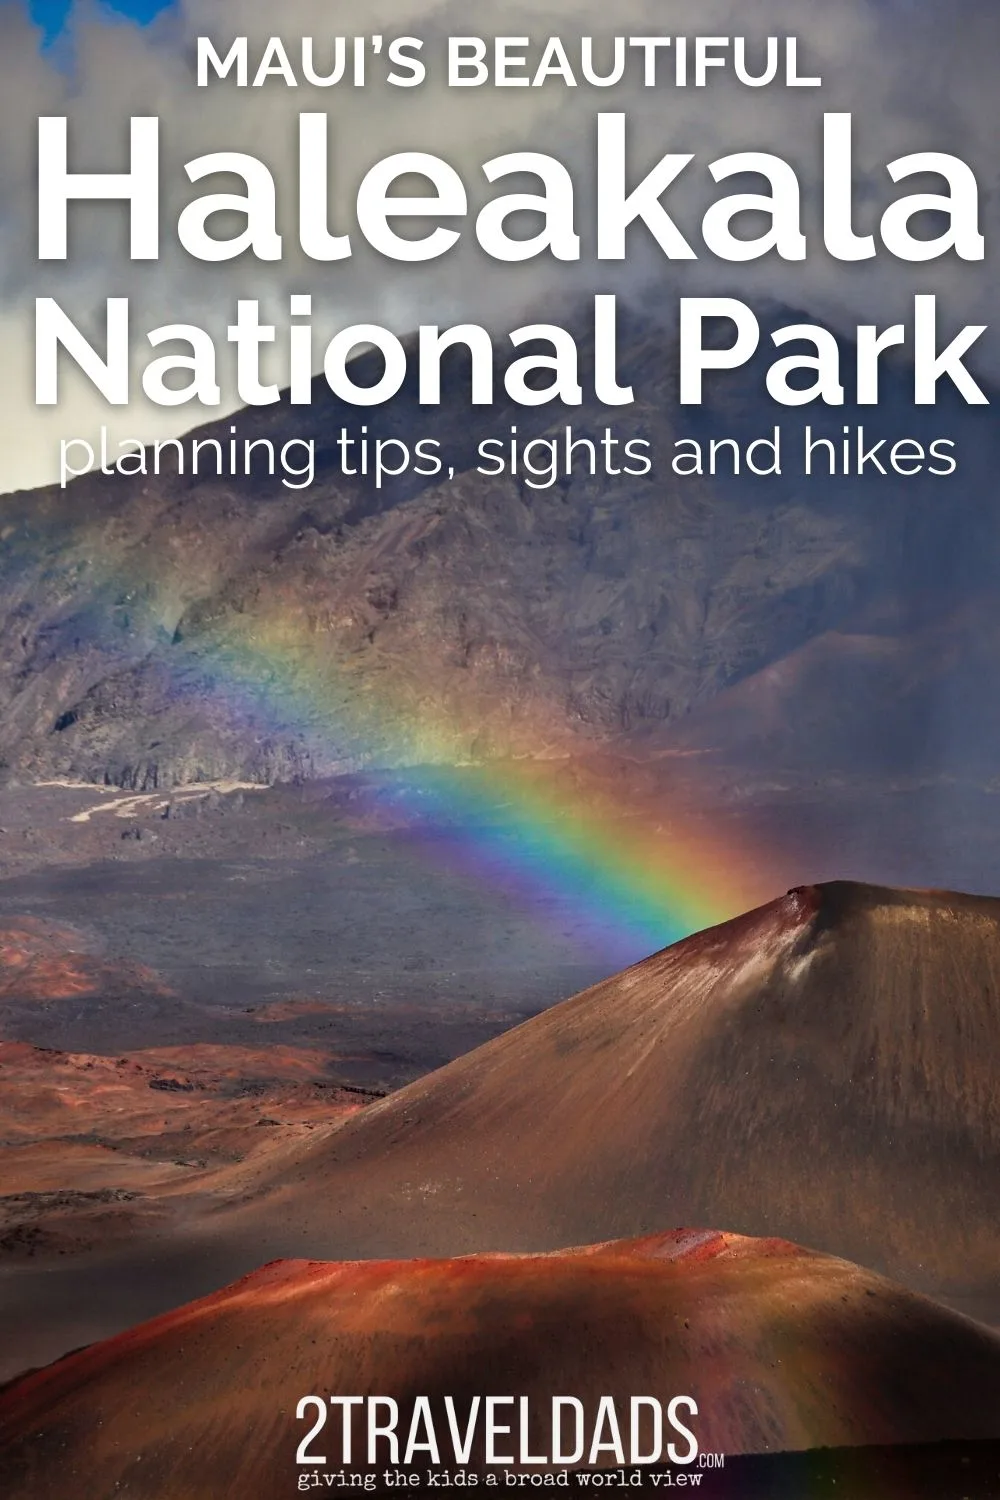 This guide to Haleakala National Park on Maui has everything you need to know from the best hiking to how many days you need to visit. Sunrise on Haleakala and biking down the mountain, picnics and ever-changing weather are all covered here.